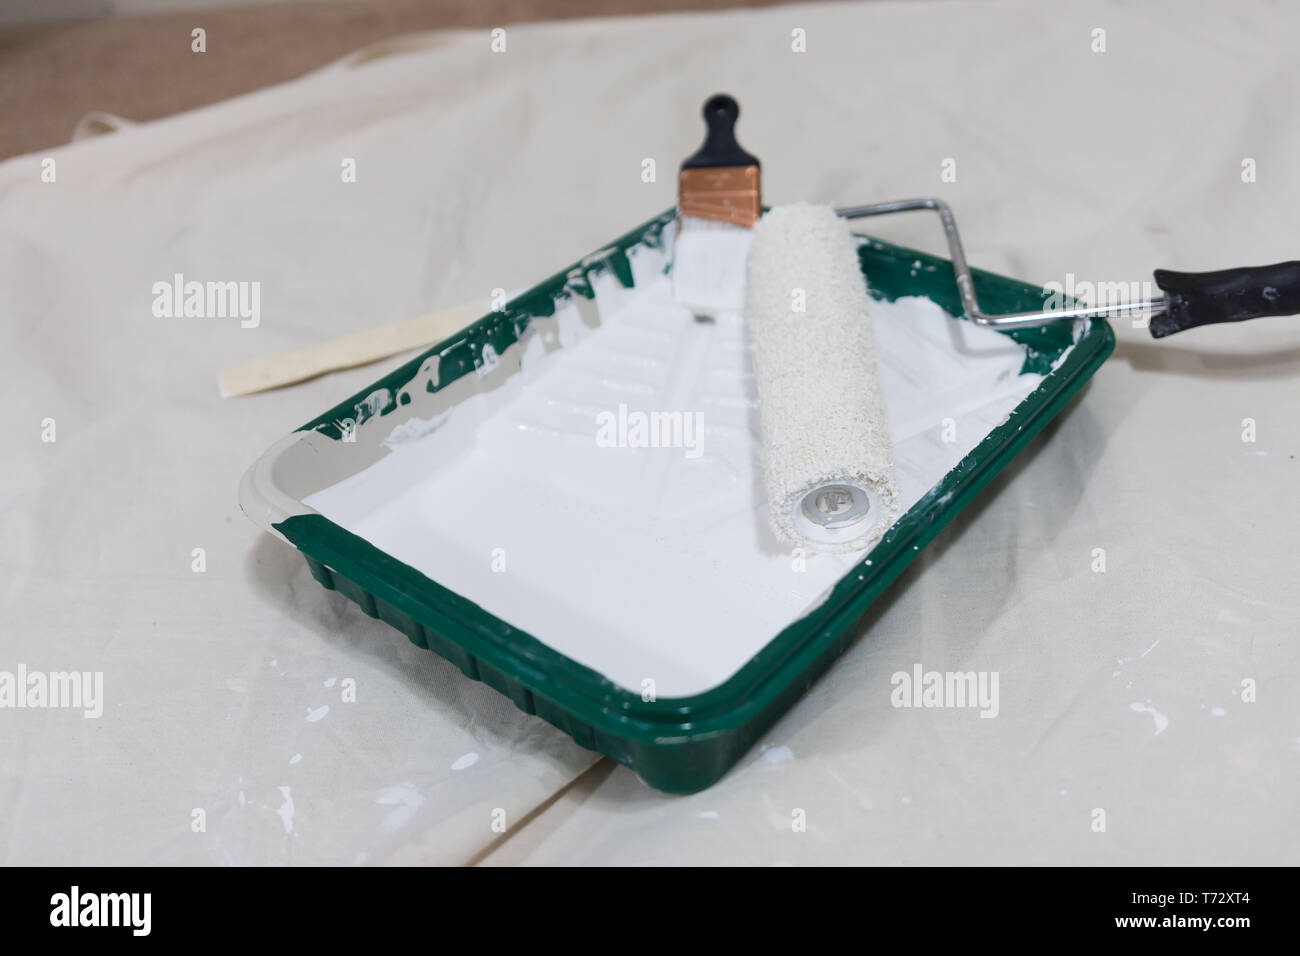 House Painting Supplies, Painter Tools in an Tray with Paint Roller Stock  Photo - Image of household, construction: 142158662